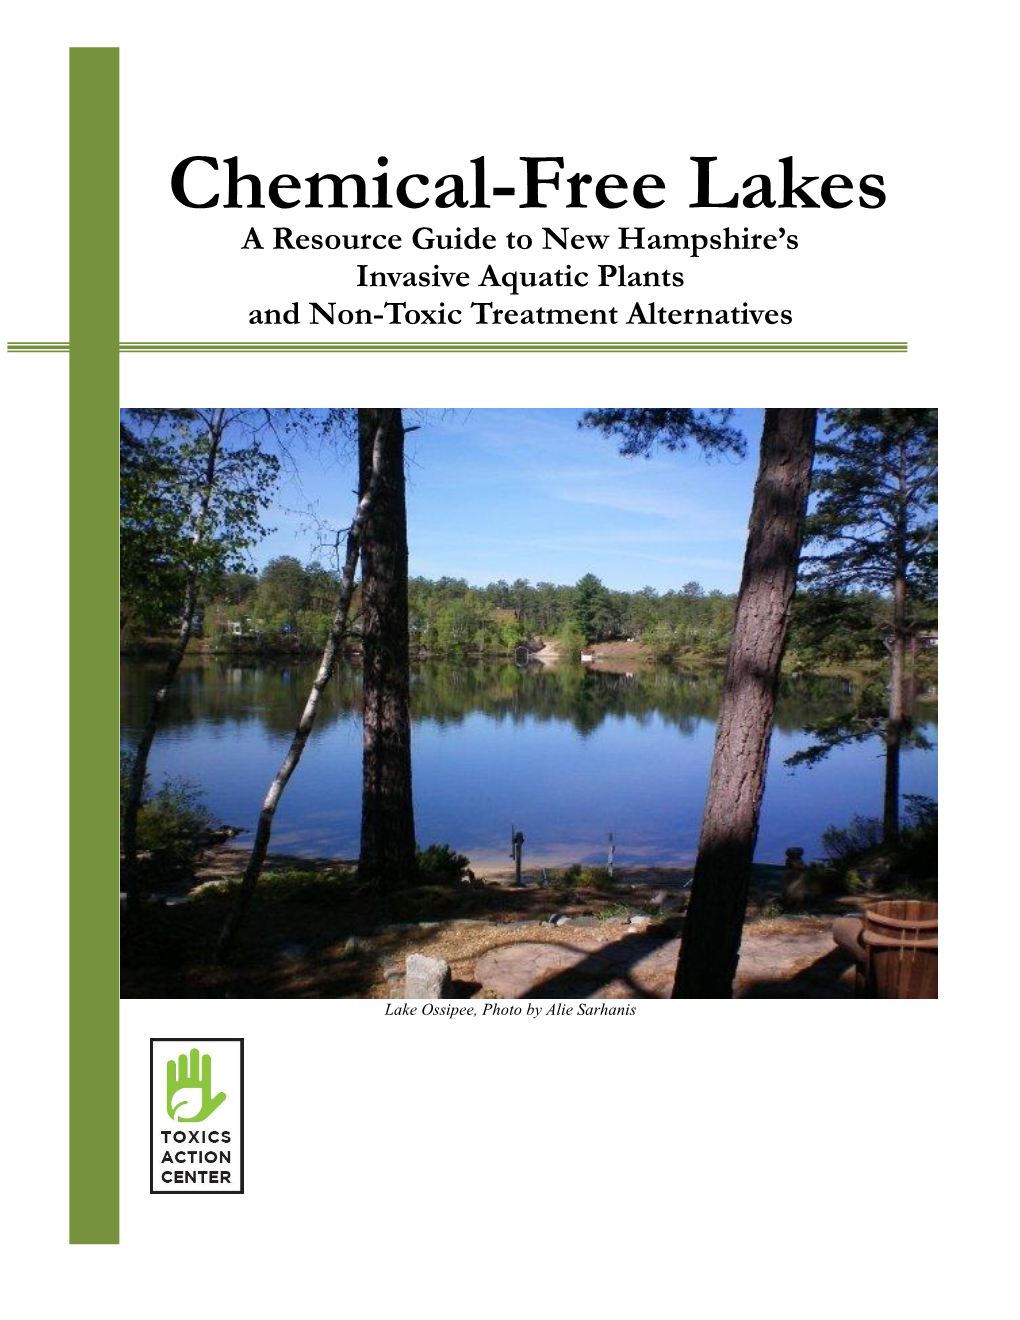 Chemical-Free Lakes a Resource Guide to New Hampshire’S Invasive Aquatic Plants and Non-Toxic Treatment Alternatives